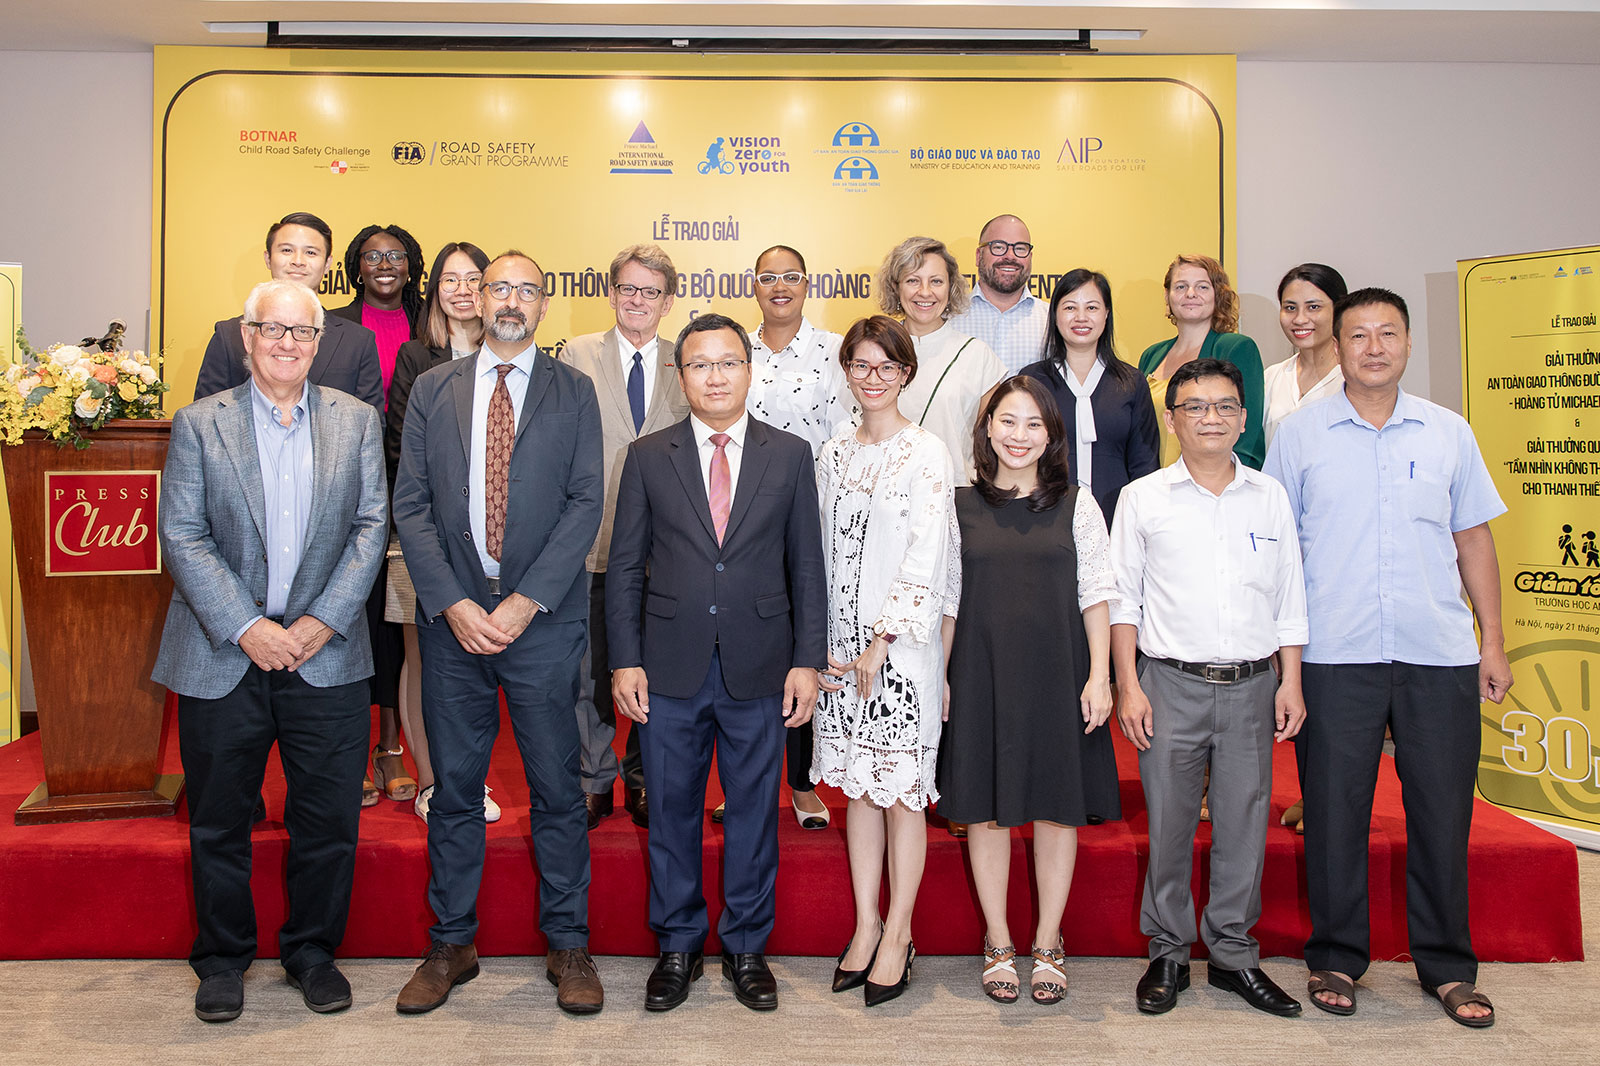 The award ceremony in Hanoi brought together representatives from the AIP Foundation, Gia Lai Province People’s Committee, Pleiku City People’s Committee and the FIA Foundation.